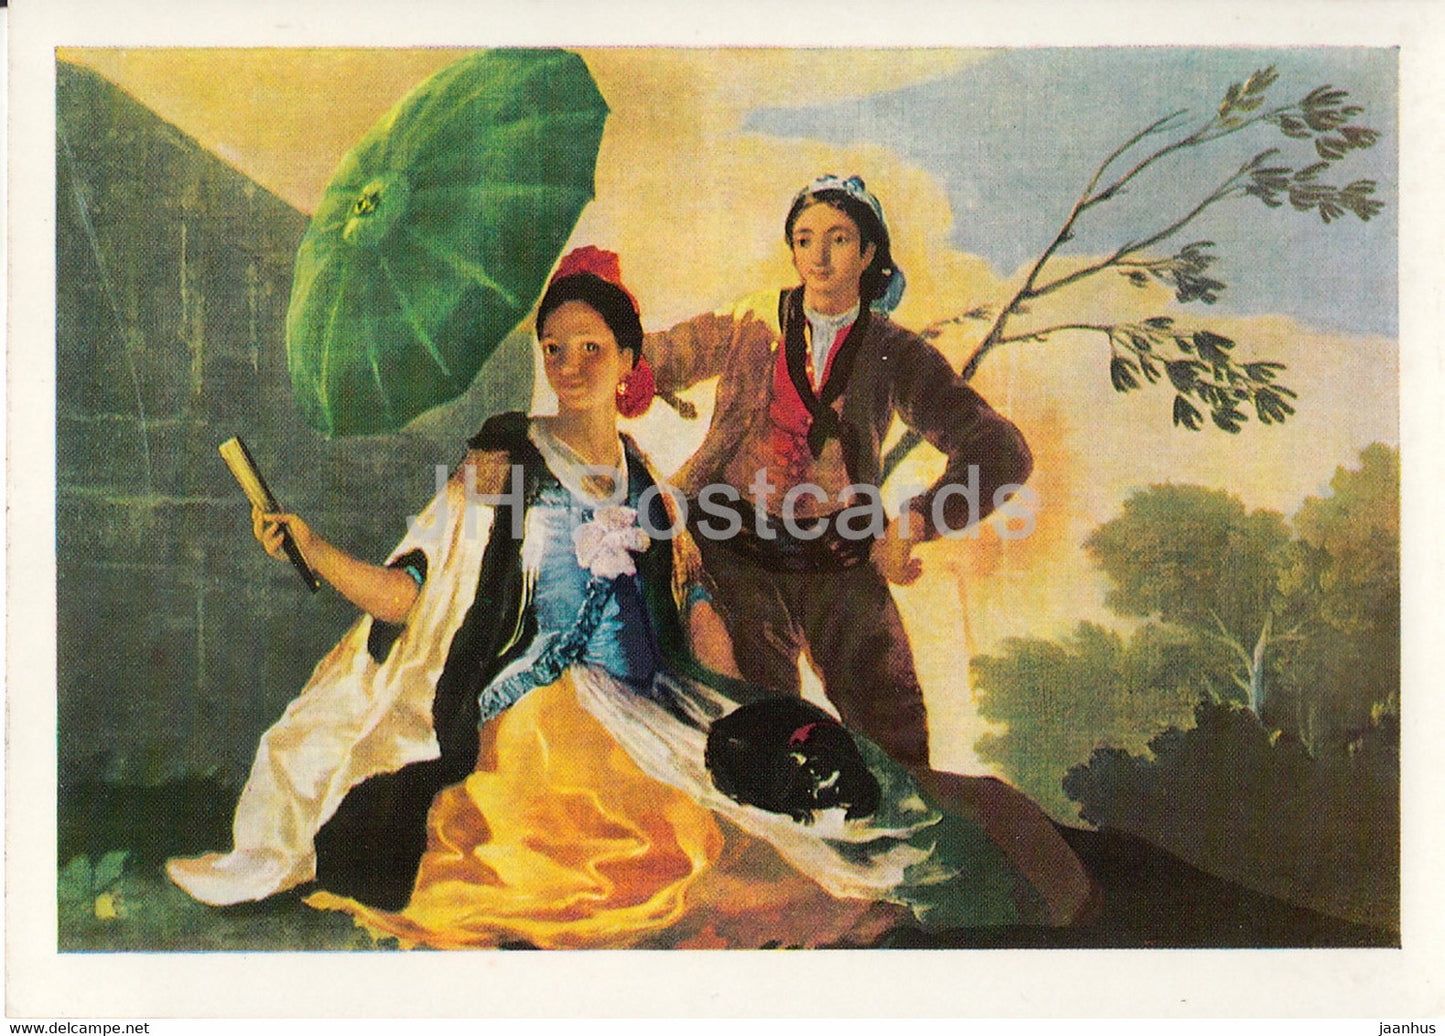 painting by Francisco Goya - Der Sonnenschirm - The Parasol - 1188 - Spanish art - Germany DDR - unused - JH Postcards